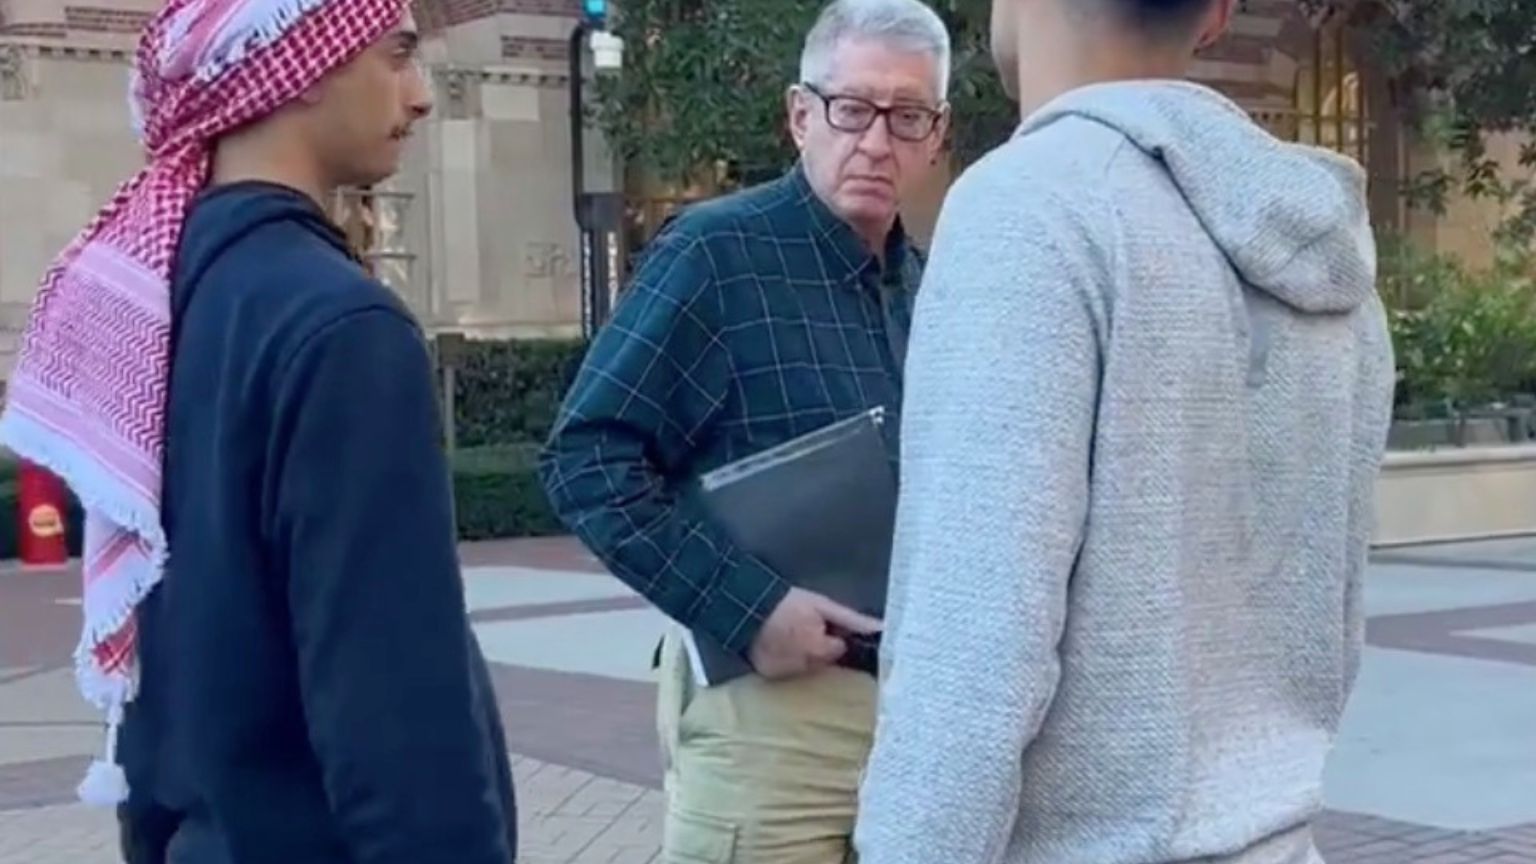 Professor John Strauss Is Placed on Leave From USC After Edited Video Is Made To Look Like He Supported Murder of Palestinians